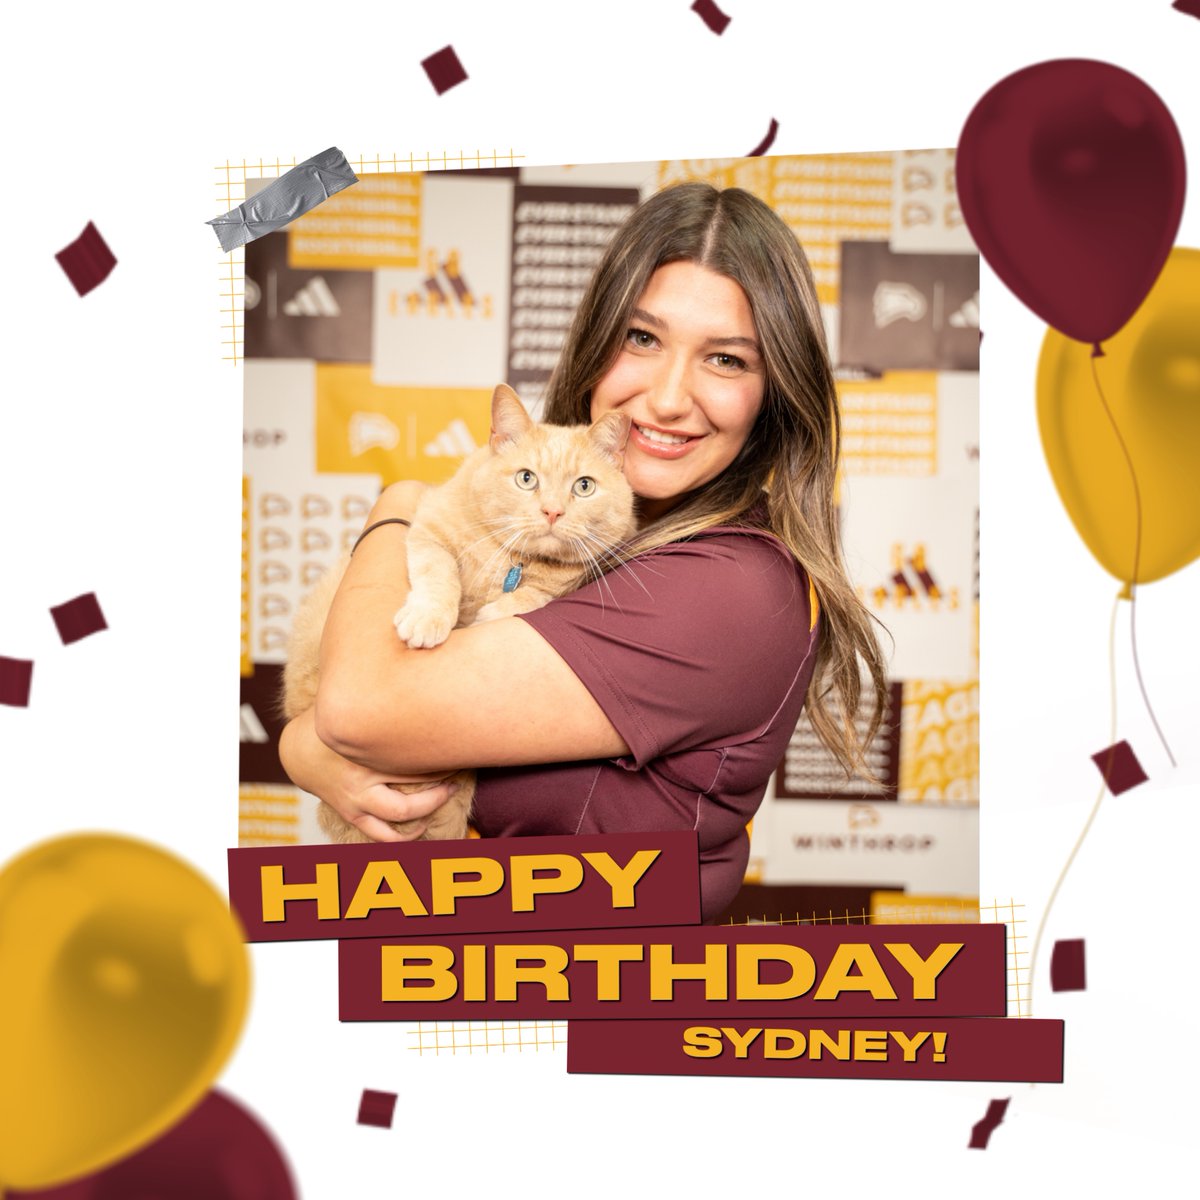 Please join us in wishing 𝓗𝓪𝓹𝓹𝔂 𝓑𝓲𝓻𝓽𝓱𝓭𝓪𝔂 to recent program graduate, Sydney Semel! We hope your final birthday as an Eagle is extra special! 🥳💛 . #GoEagles | #ROCKtheHILL